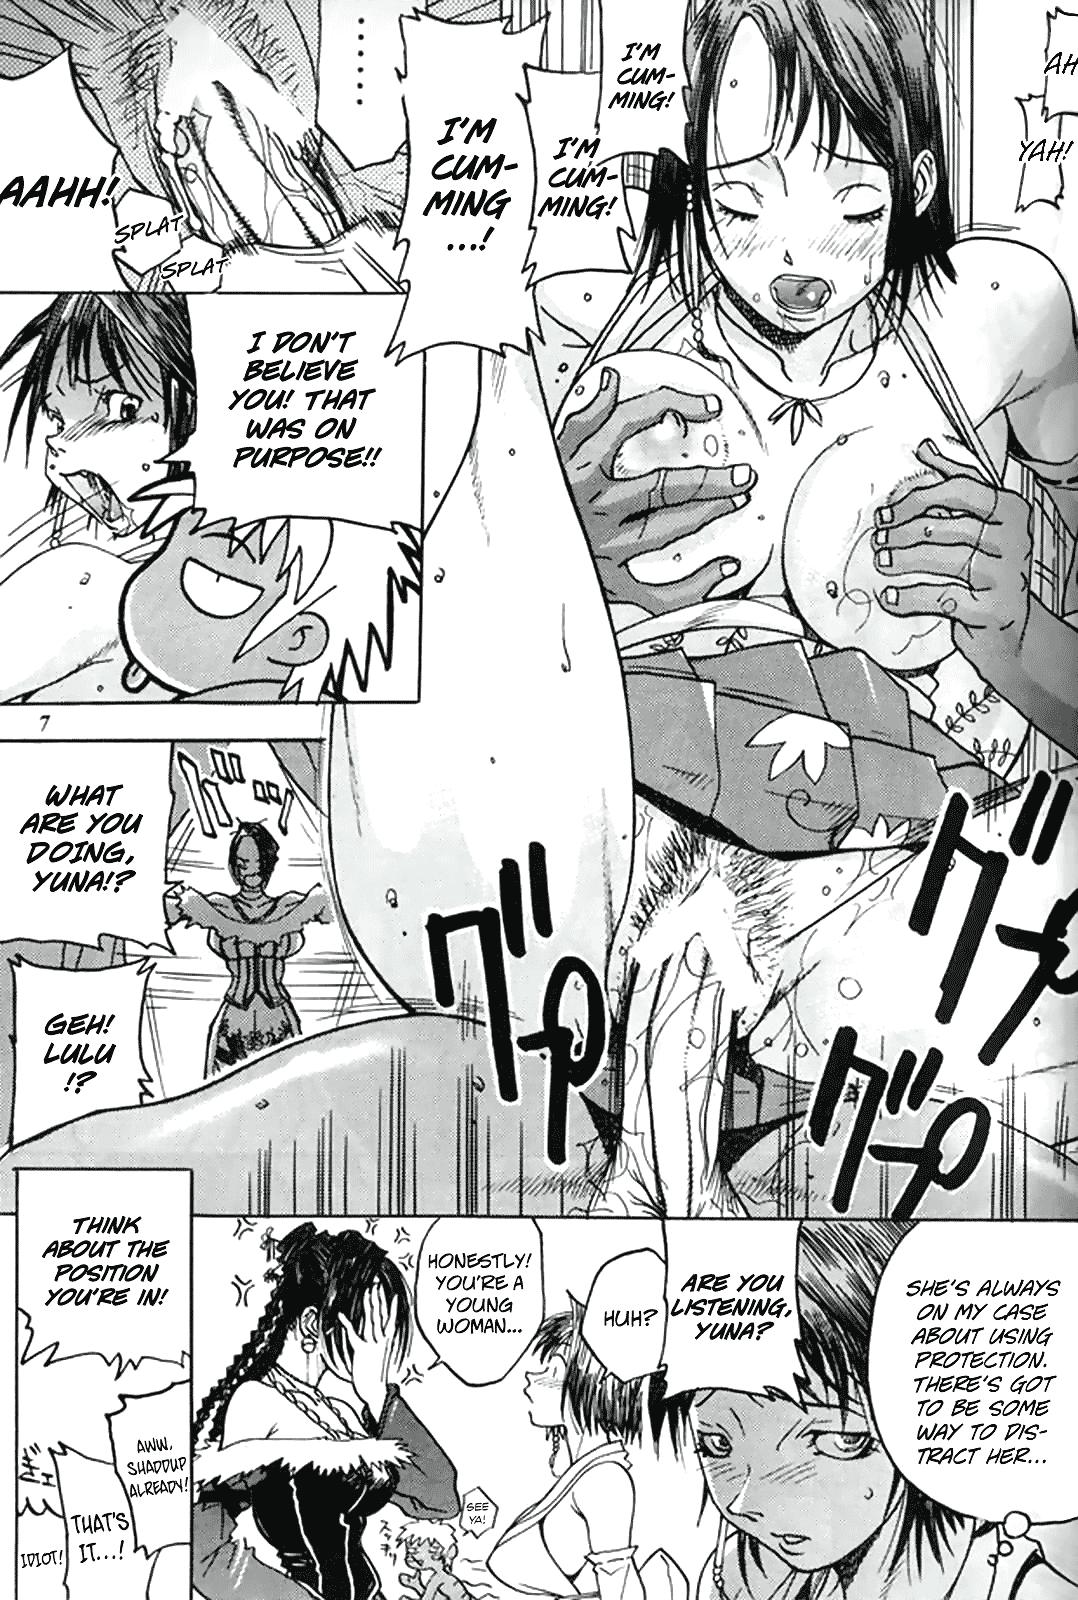 Storyline MODEL special 13 - Final fantasy x Sesso - Page 6